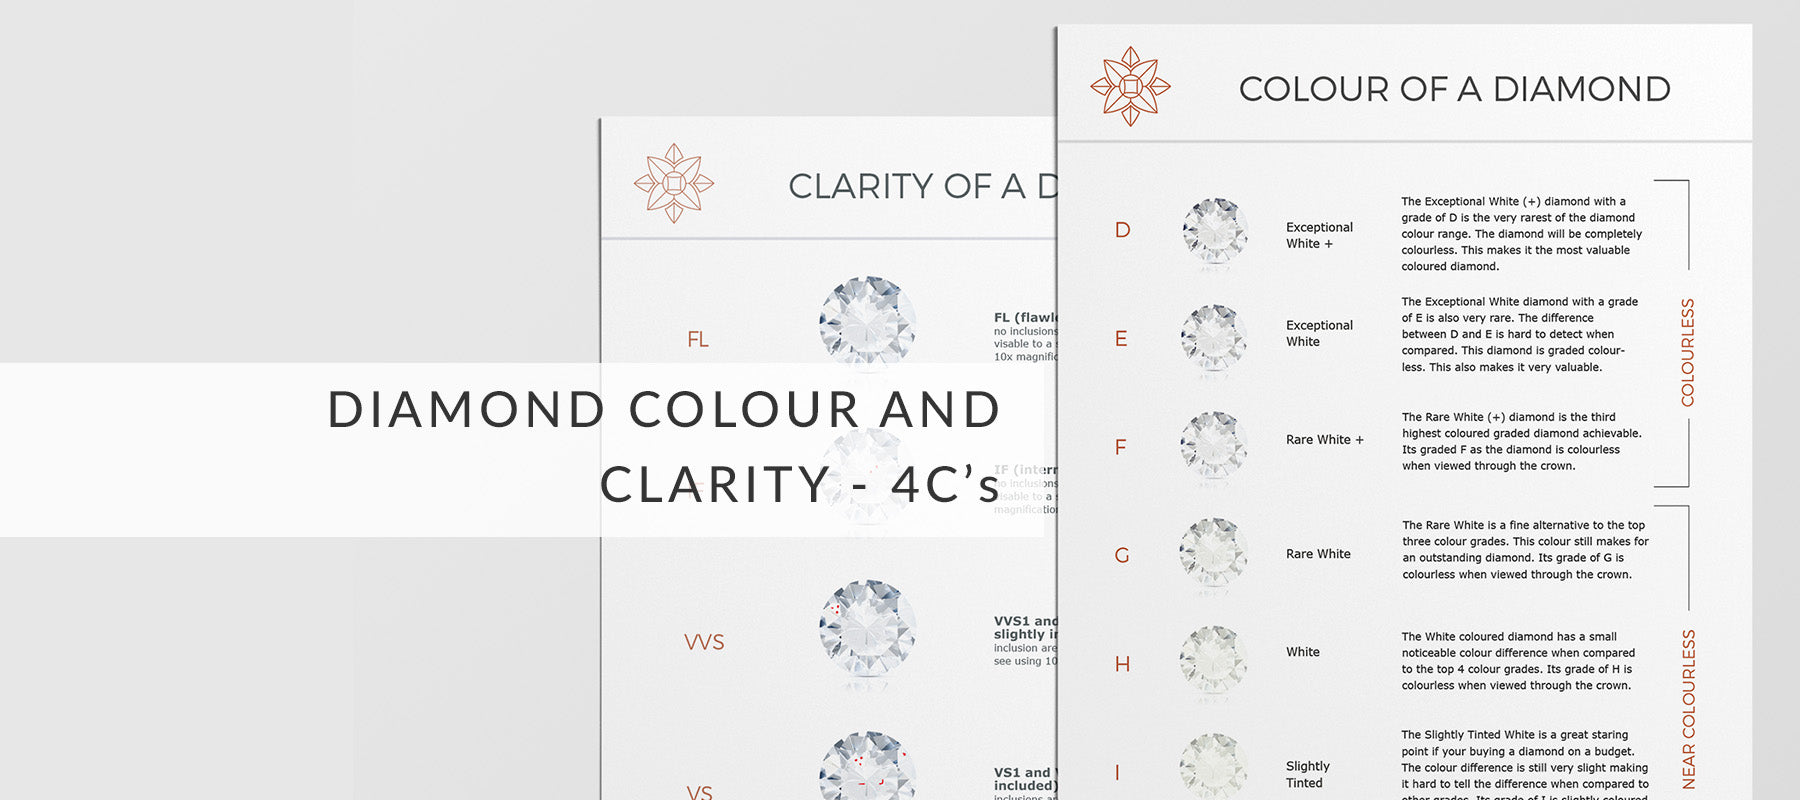 diamond colour and clarity 4c's education guides